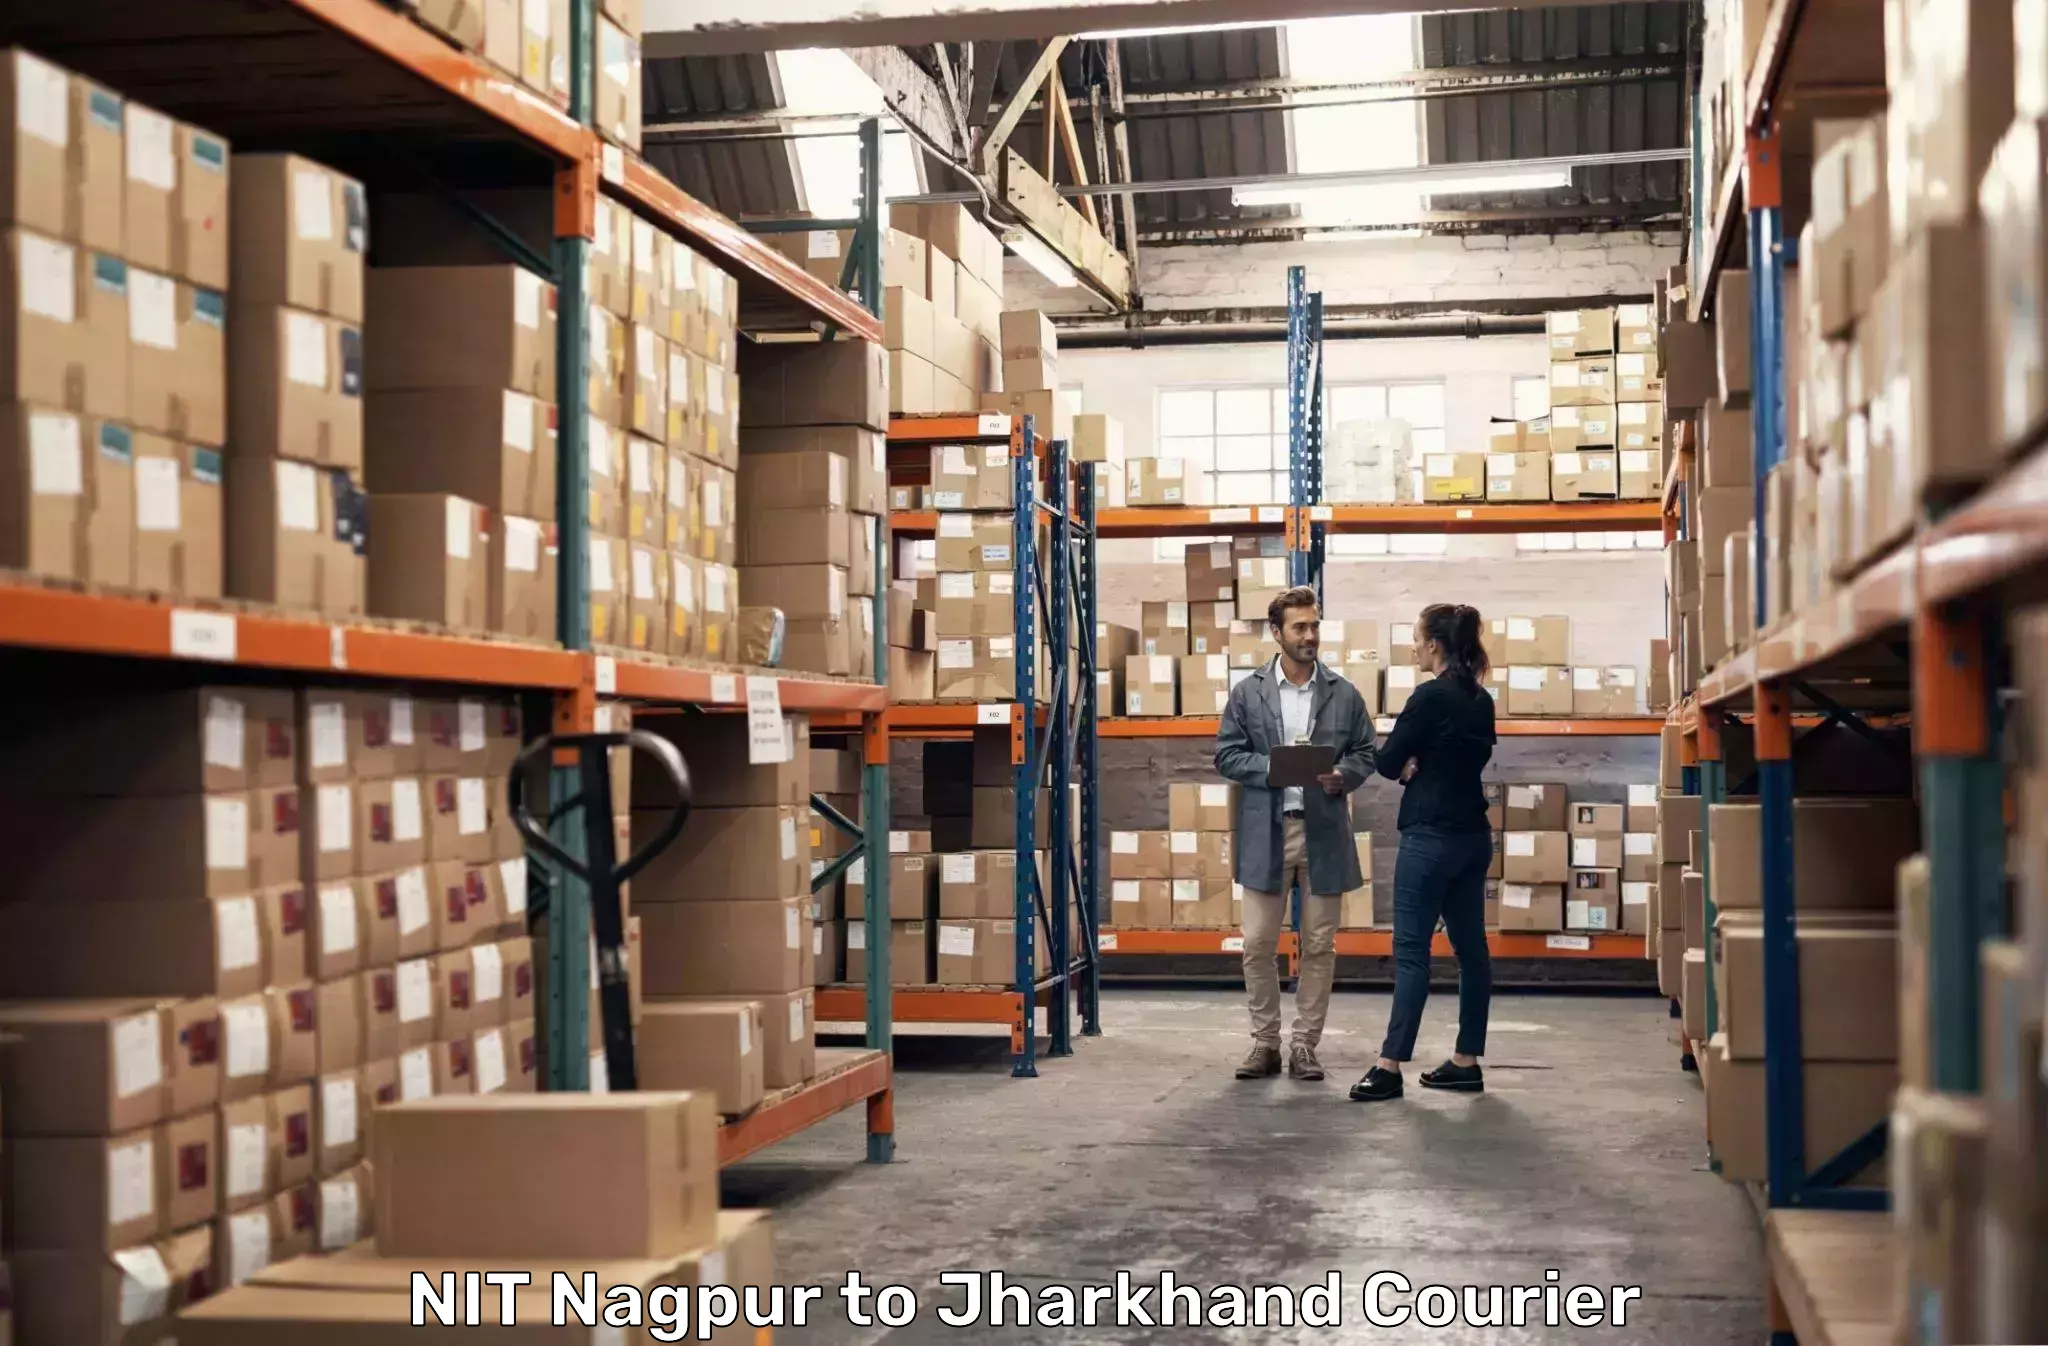 High-priority parcel service NIT Nagpur to Ranchi